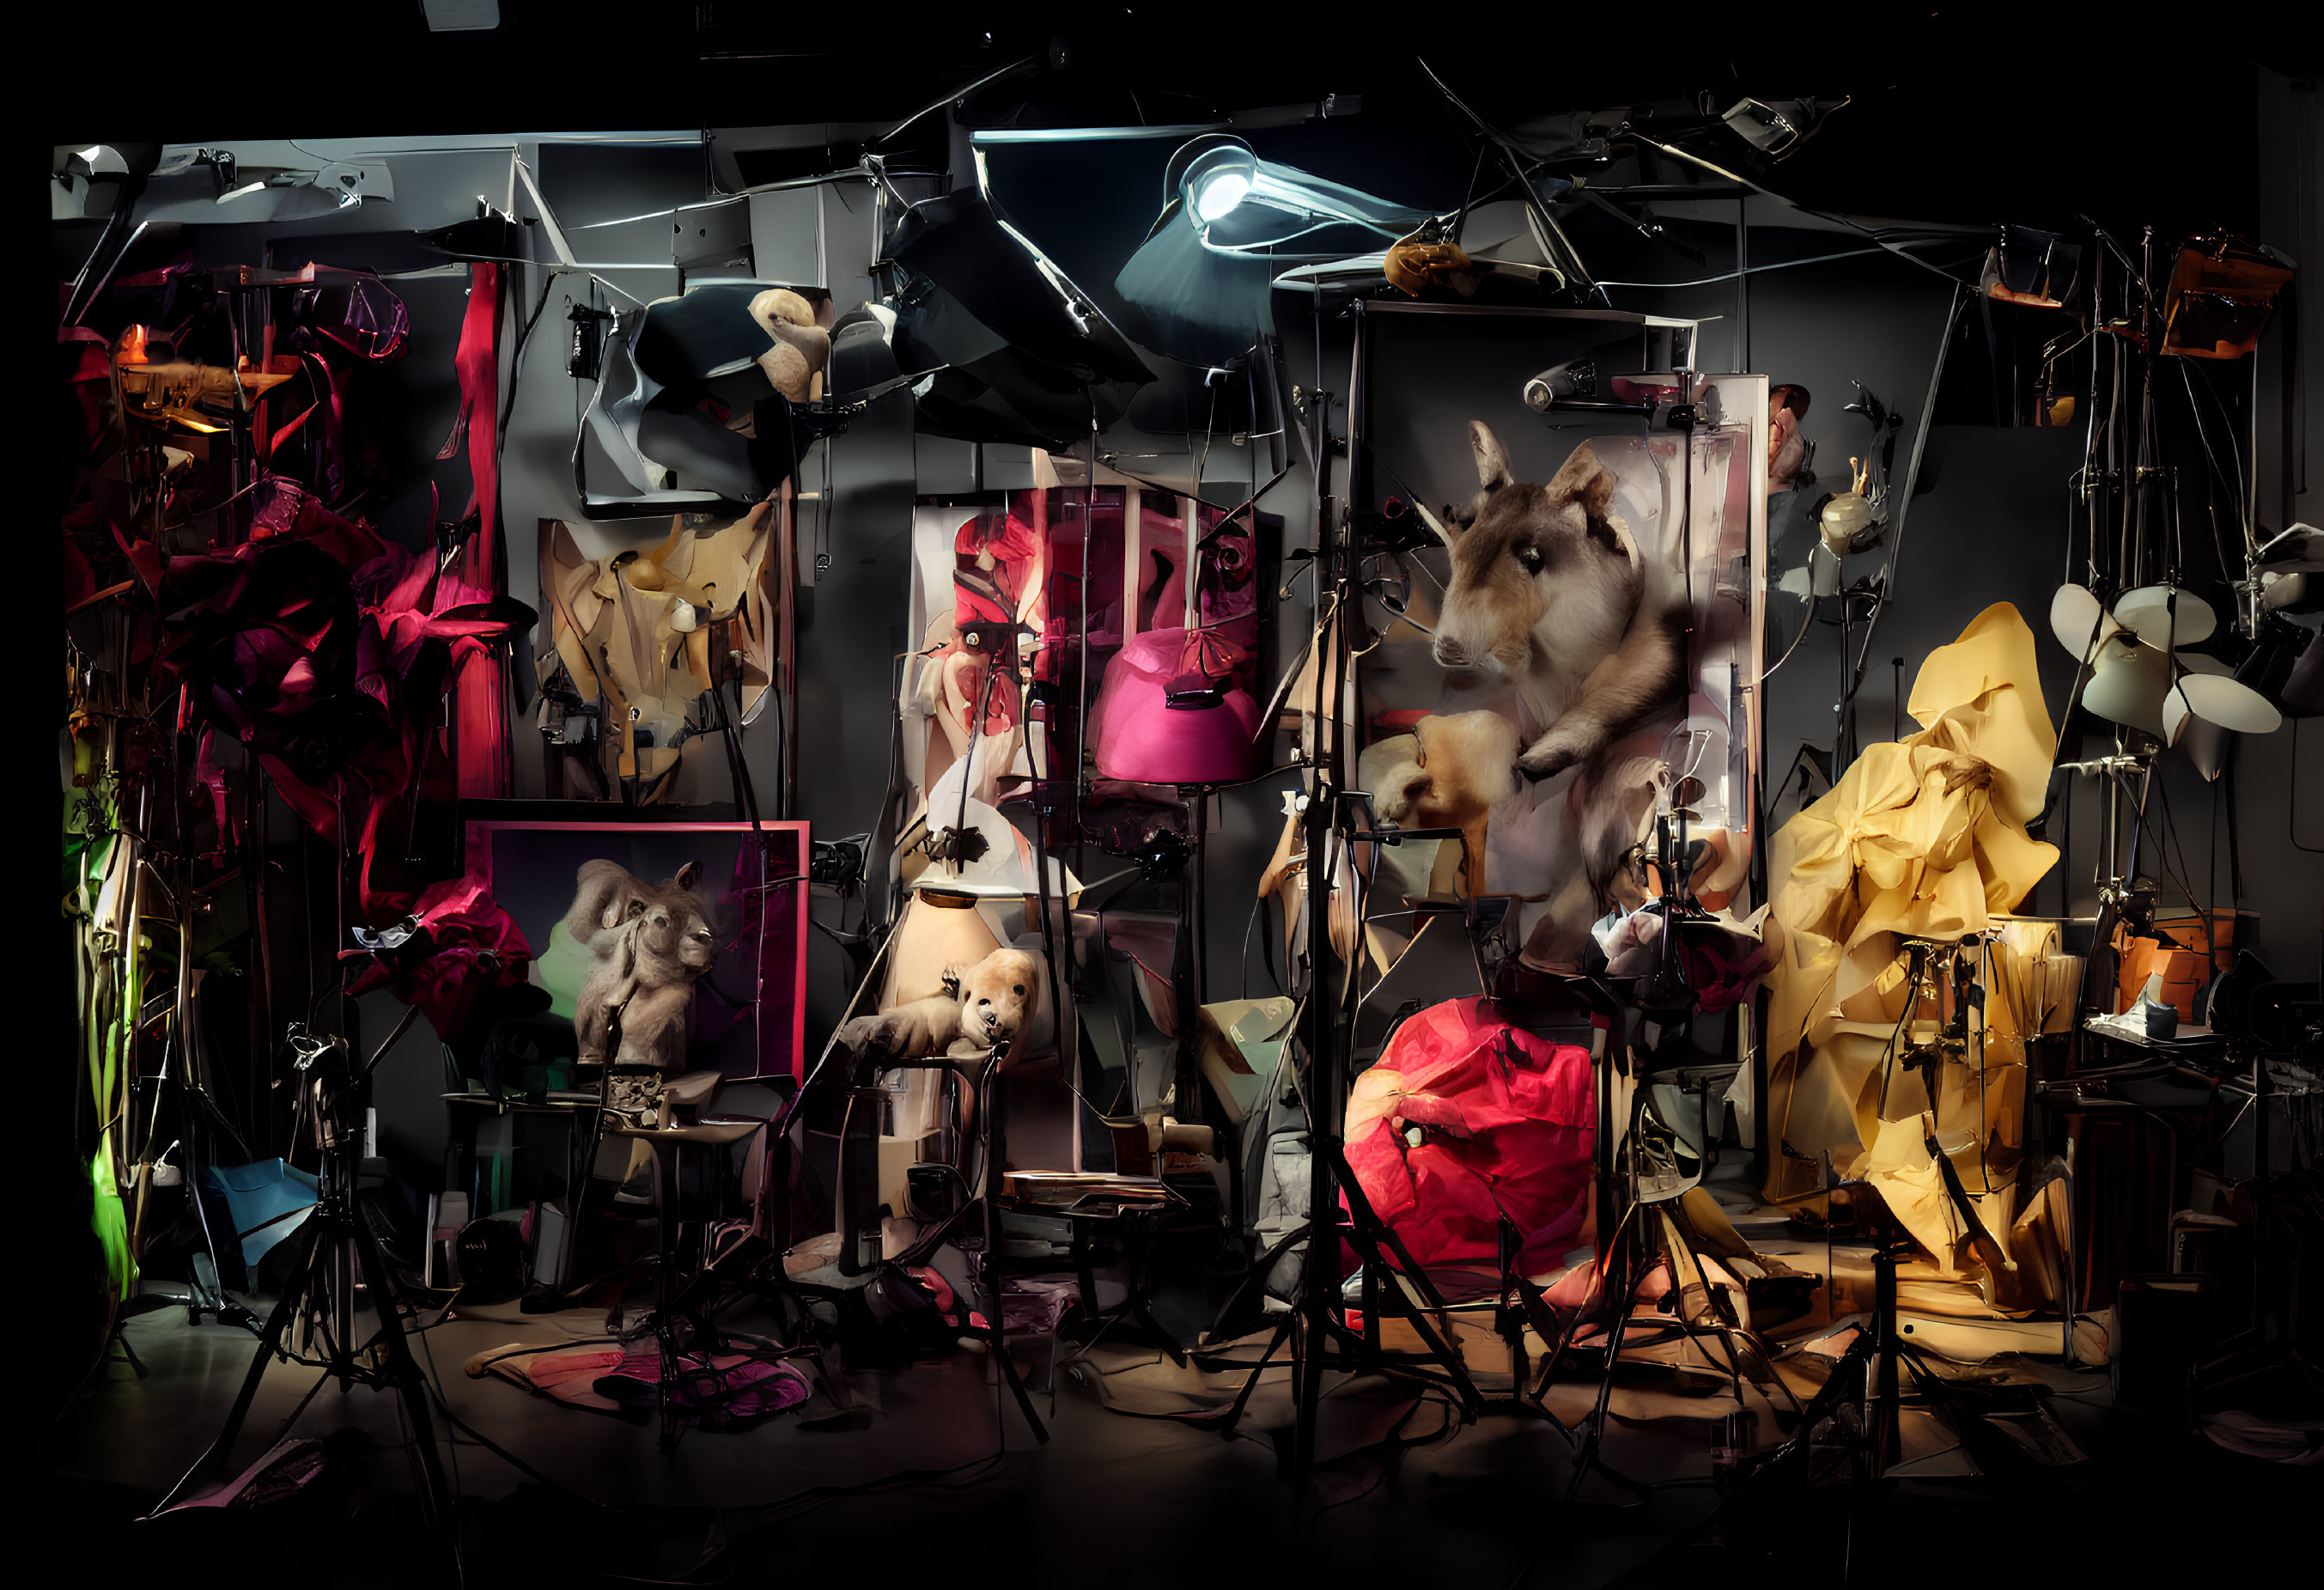 Cluttered studio with mannequin parts, lighting gear, and cat images